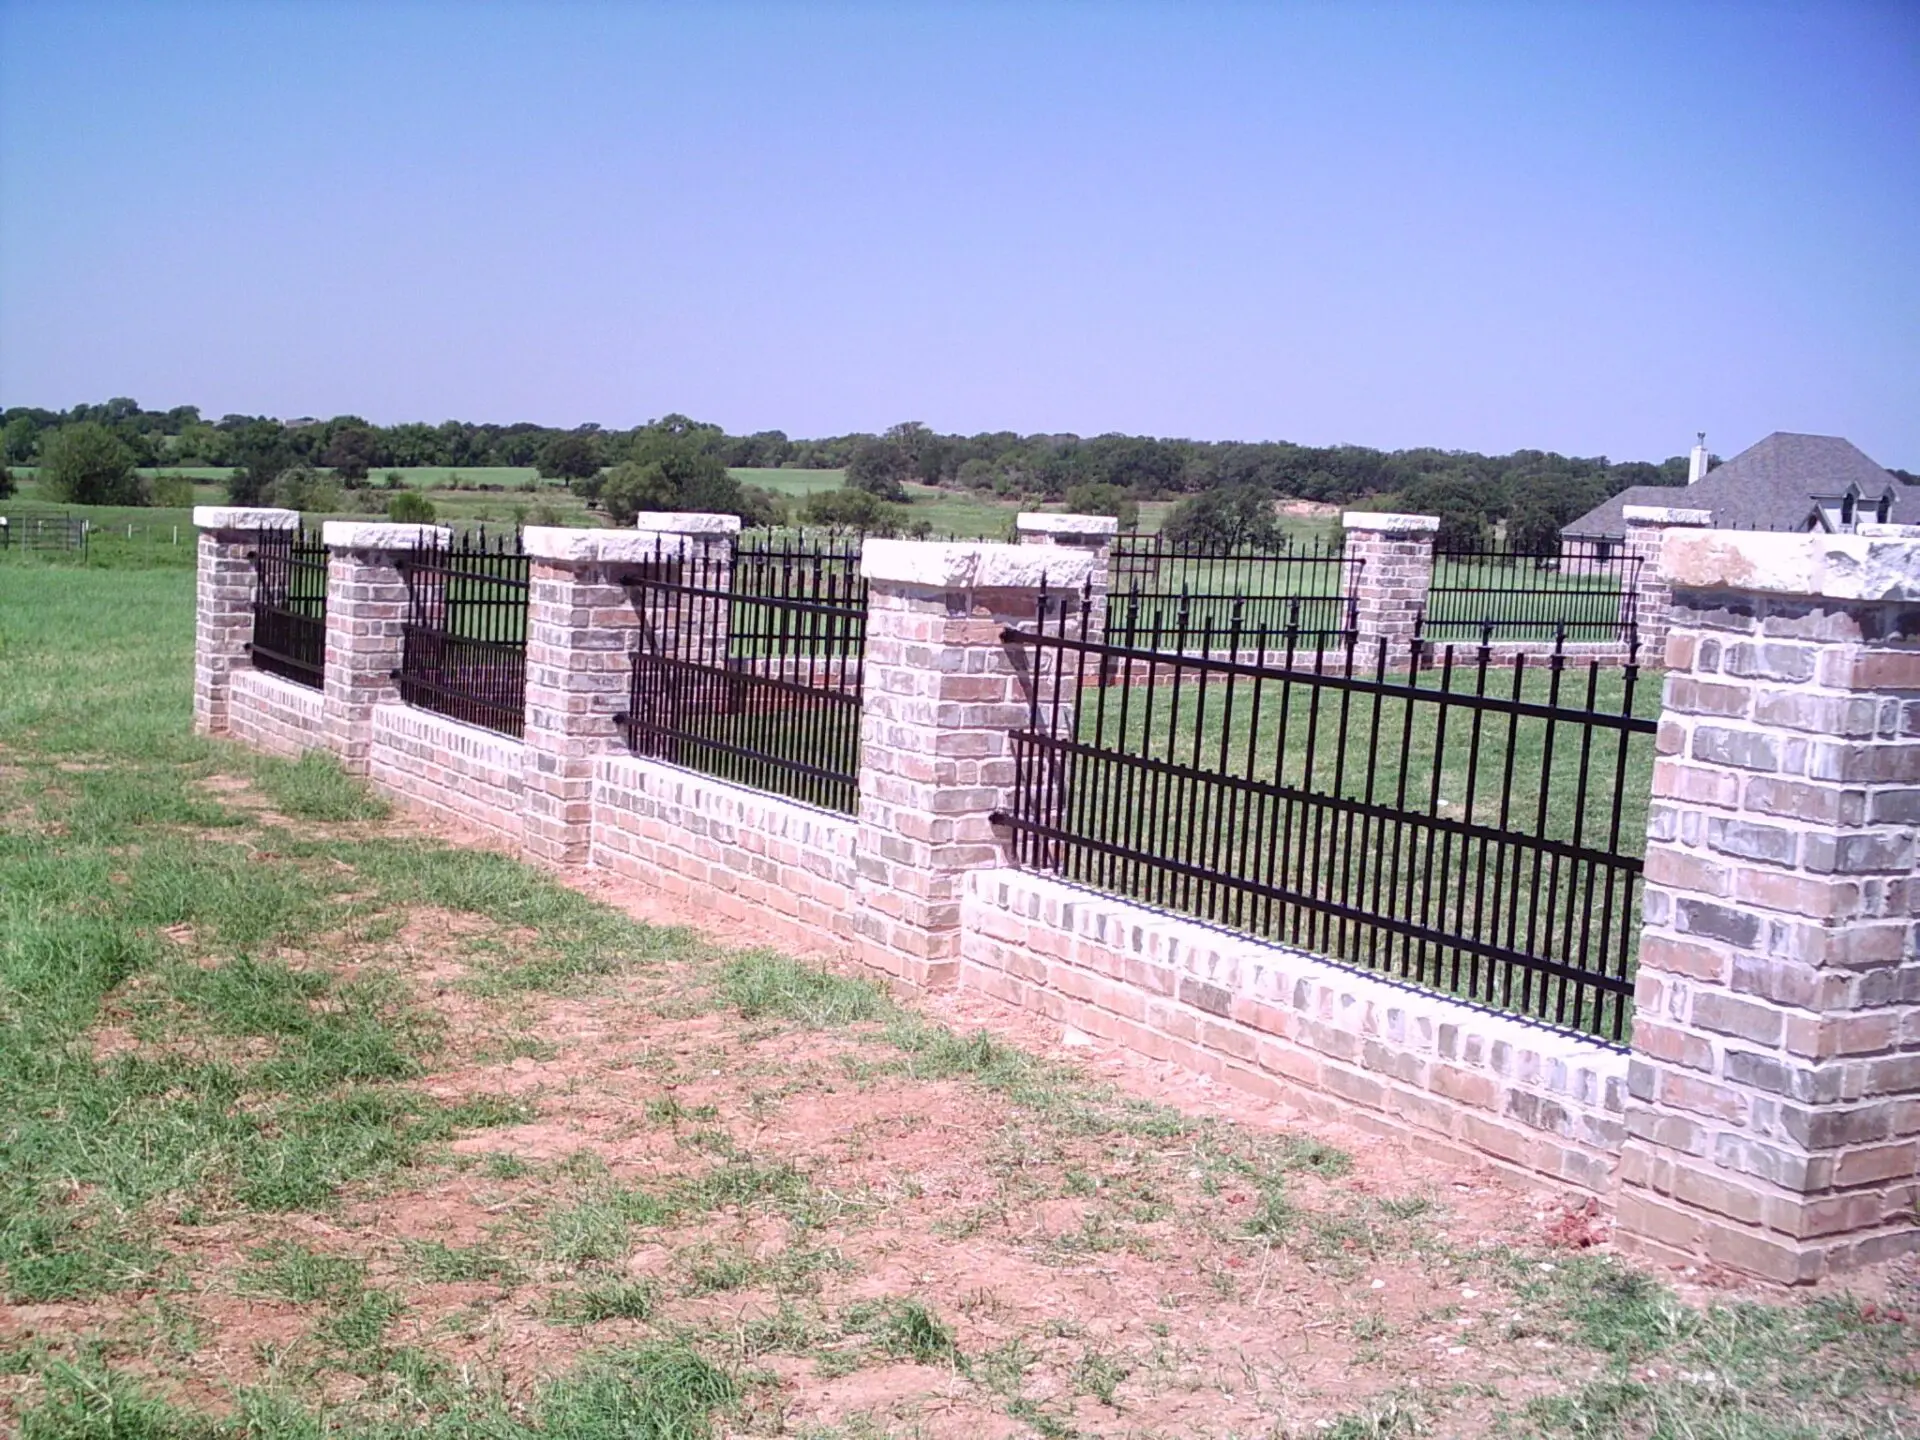 A fenced area by a black iron fence with brick pillars